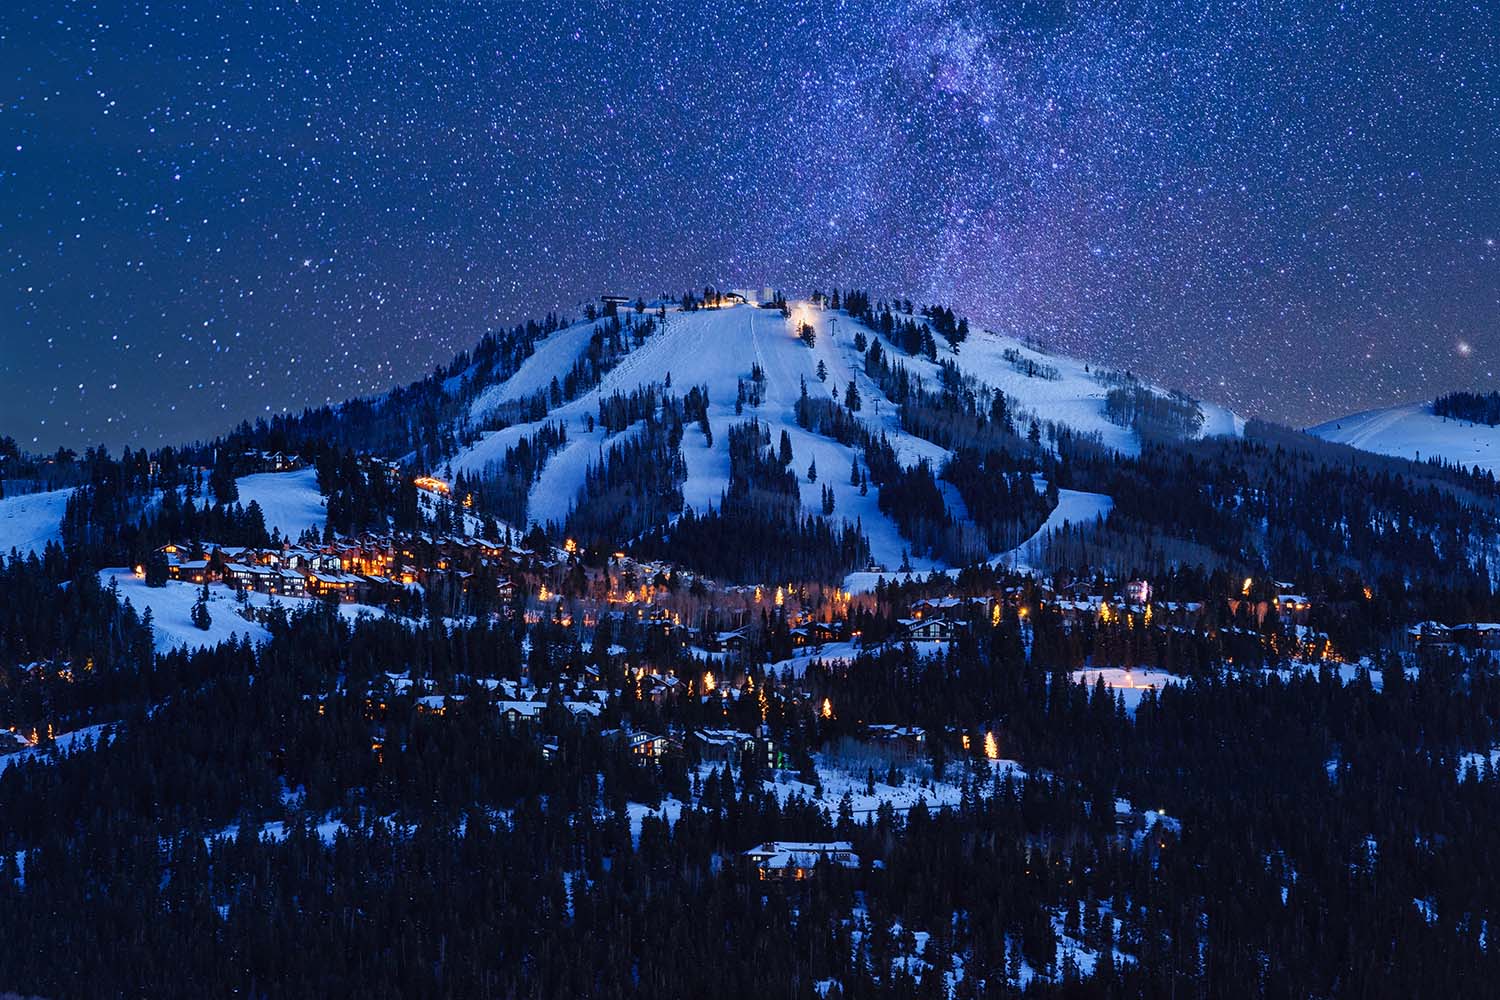 A snowy mountain at night in Park City, one of the best winter vacation spots for skiiers